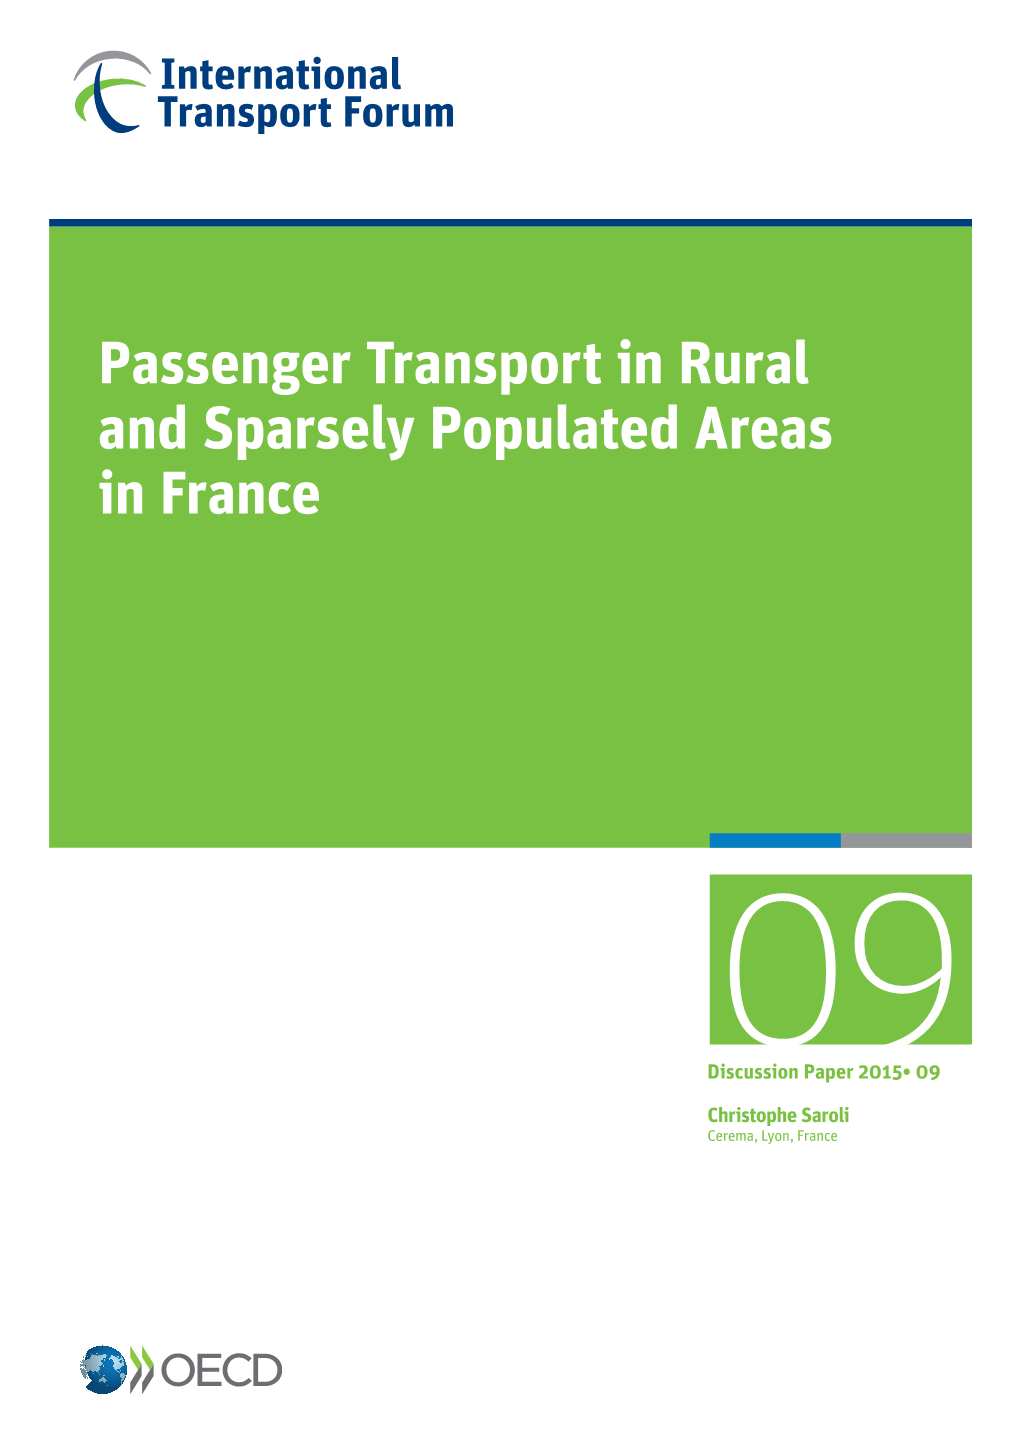 Passenger Transport in Rural and Sparsely Populated Areas in France